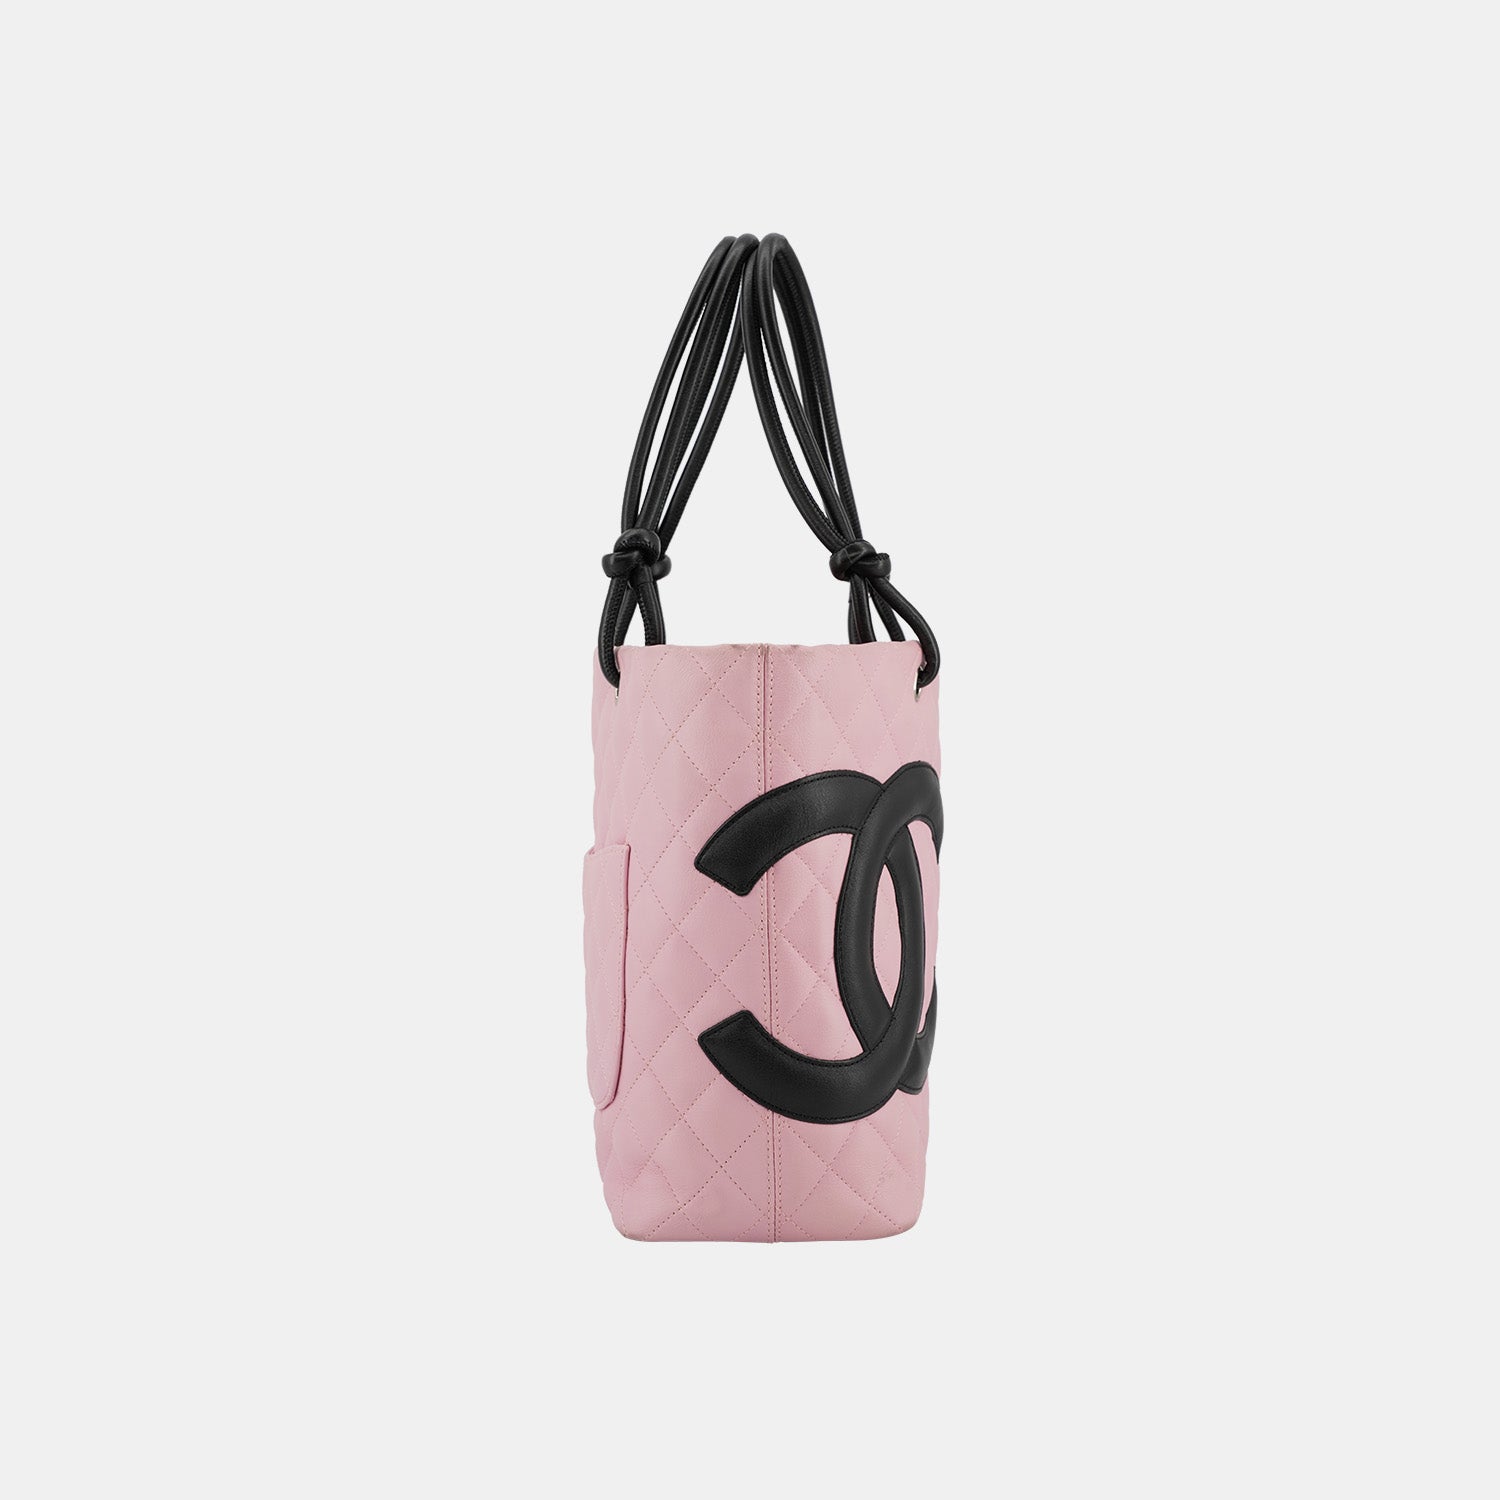 Uptown Cheapskate - Chanel Cambon Line tote bag! ✨ Retail